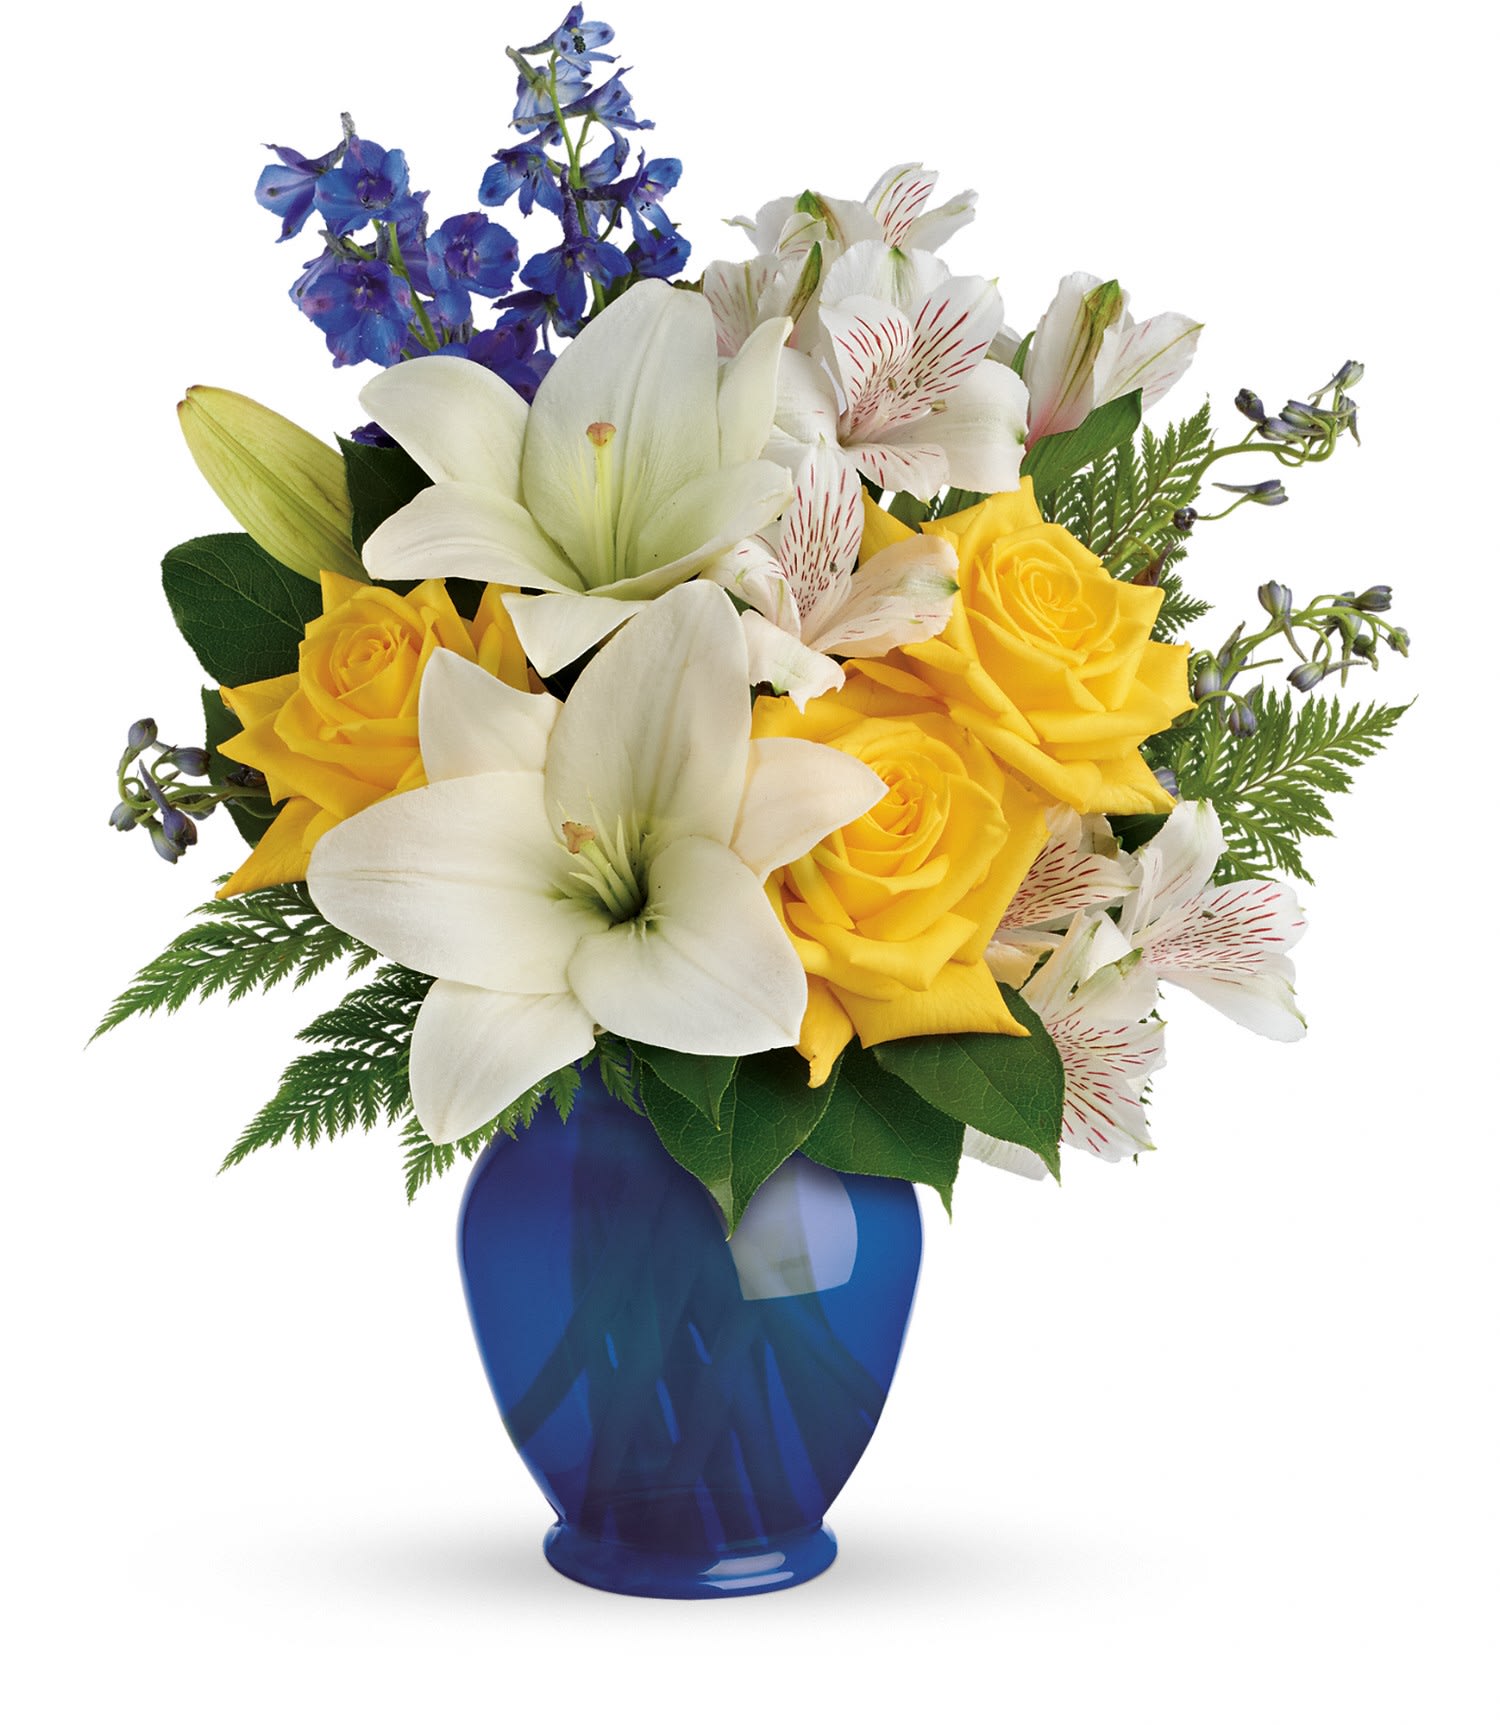 Teleflora's Oceanside Garden Bouquet - Treat them to a day at the shore, in the comfort of their home! This invigorating mix of yellow roses, white lilies and blue delphinium captures the spirit and shades of the shoreline. Hand-delivered in a bold blue ginger jar, it's a delightful gift any time of year!